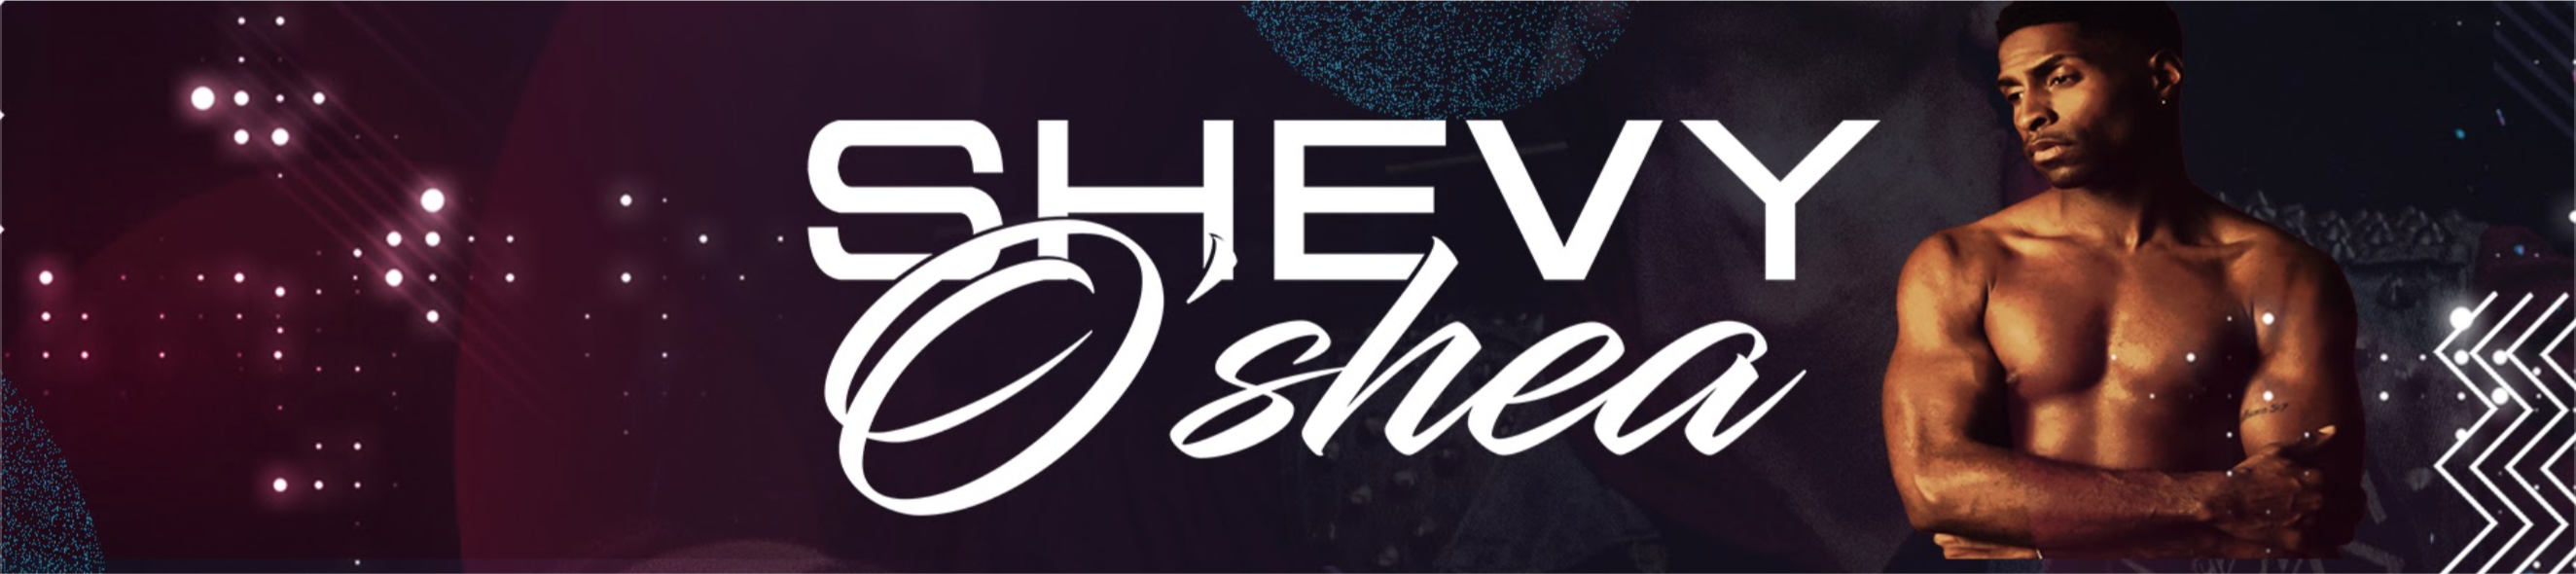 R&B-Pop artist Shevy O’Shea continues to impress with his music and has just released a new single called #RihannaMove